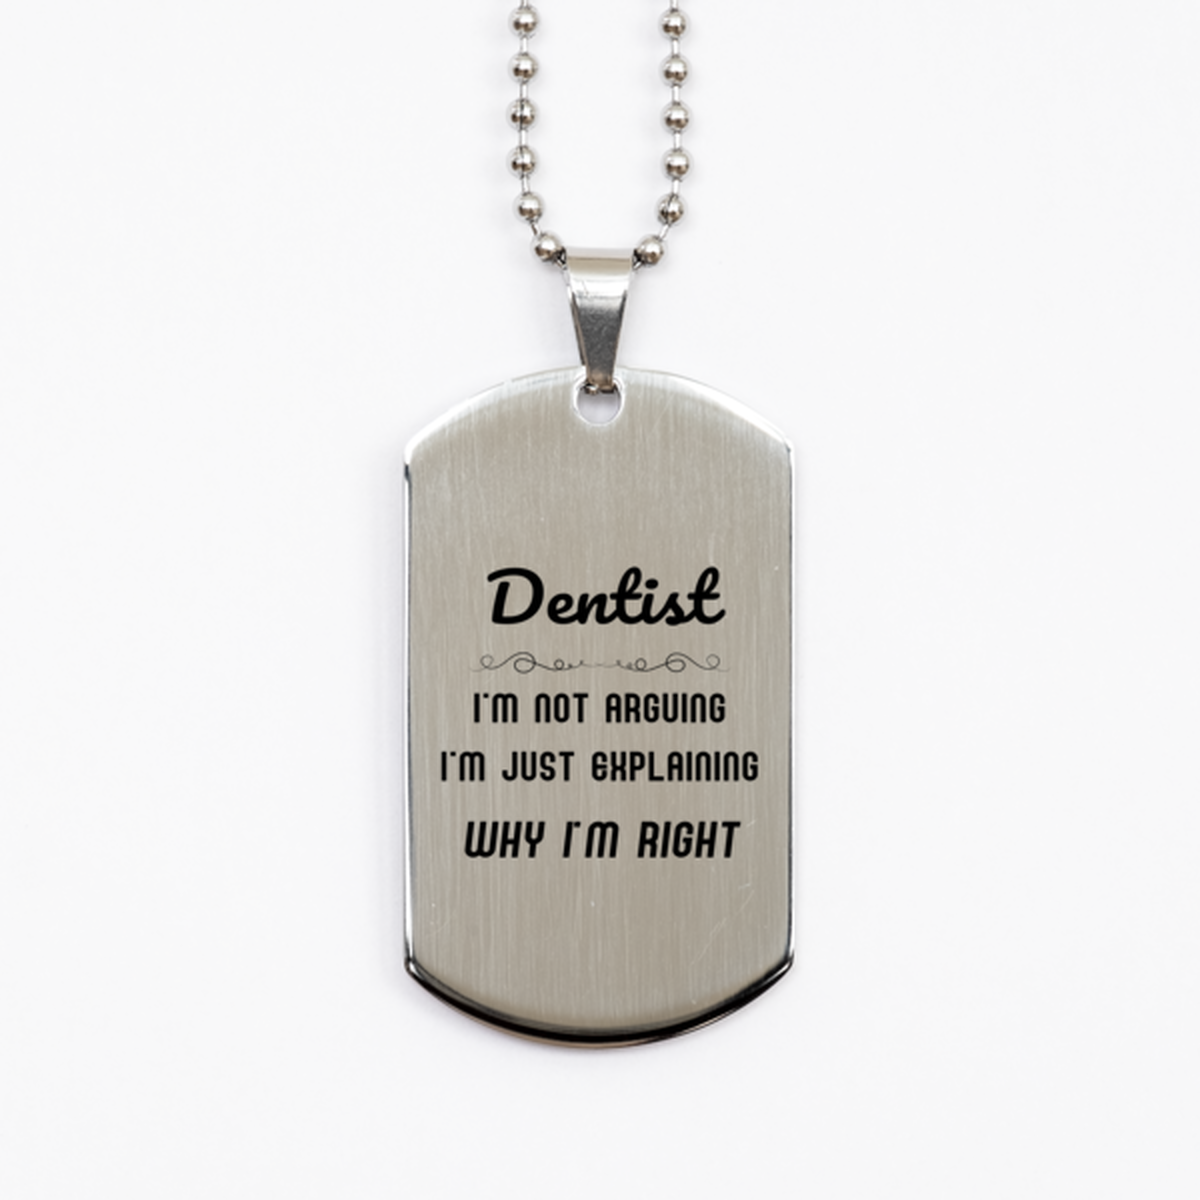 Dentist I'm not Arguing. I'm Just Explaining Why I'm RIGHT Silver Dog Tag, Funny Saying Quote Dentist Gifts For Dentist Graduation Birthday Christmas Gifts for Men Women Coworker